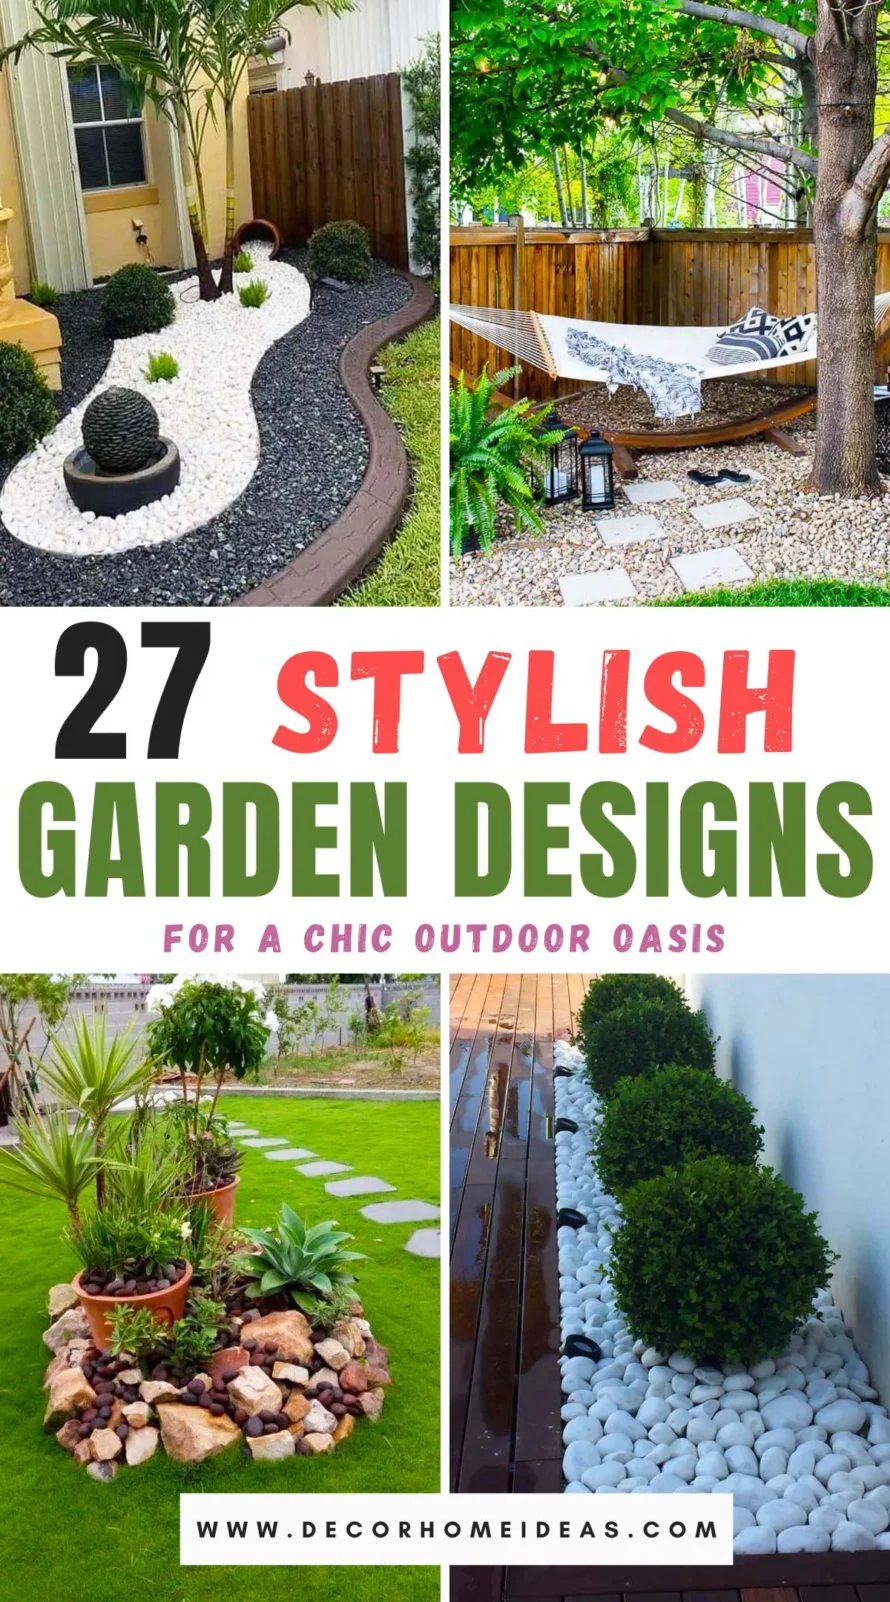 Explore 27 chic garden concepts that promise to elevate your outdoor space with style and sophistication. From sleek modern layouts to cozy, stylish nooks, these ideas are perfect for a fresh outdoor revamp. Dive in to find your favorite!